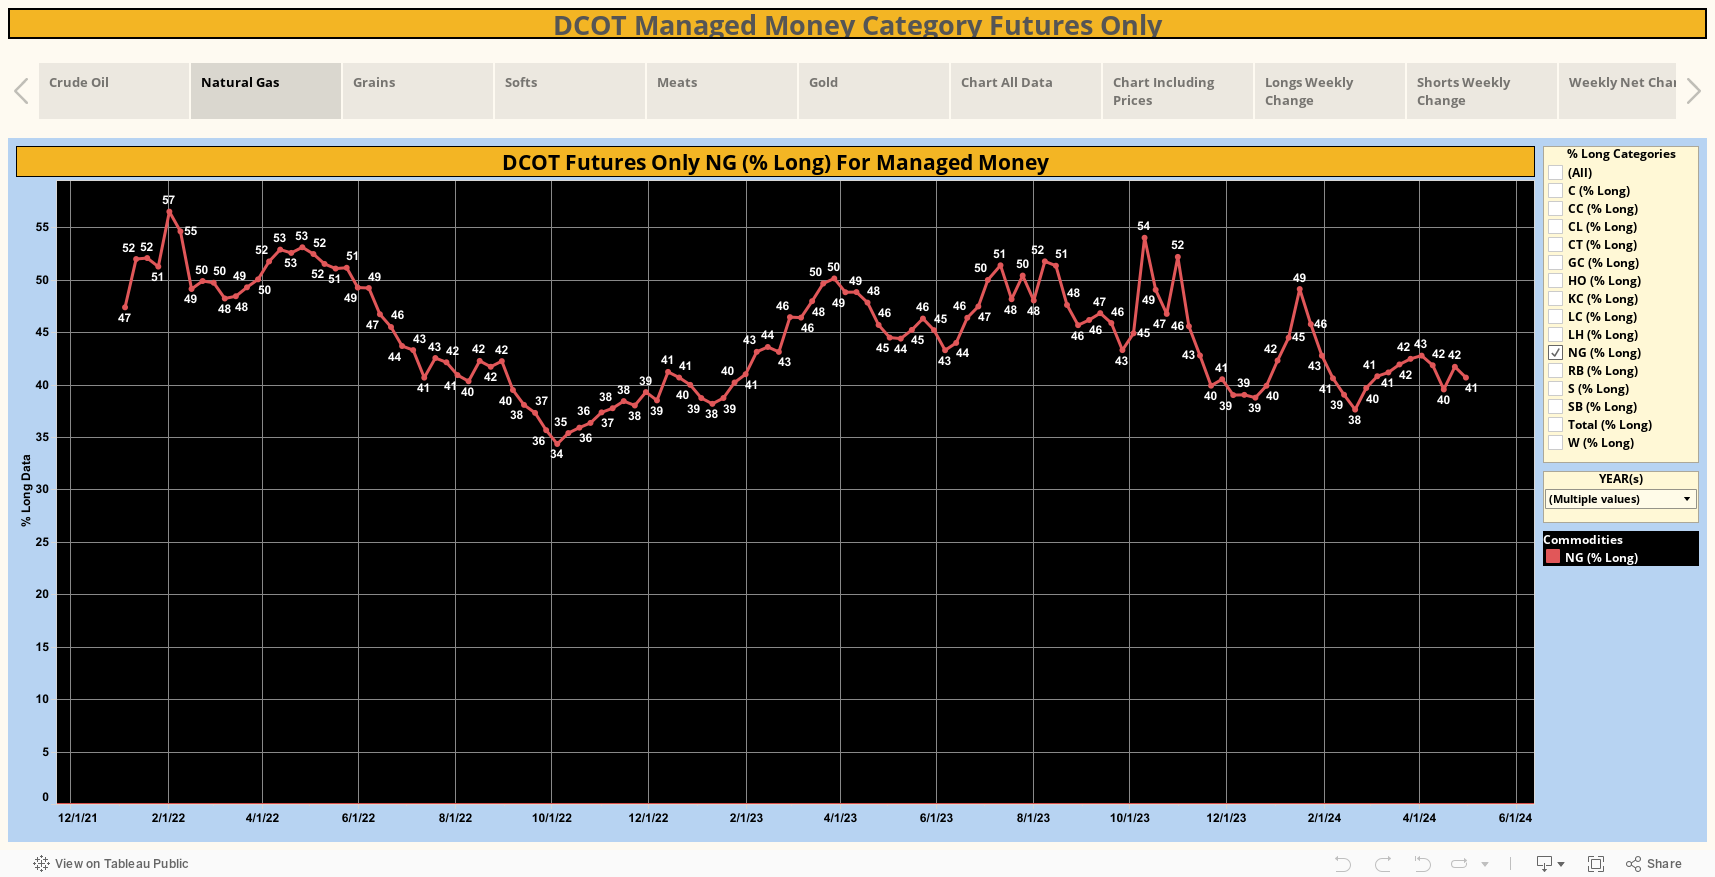 DCOT Managed Money Category Futures Only 